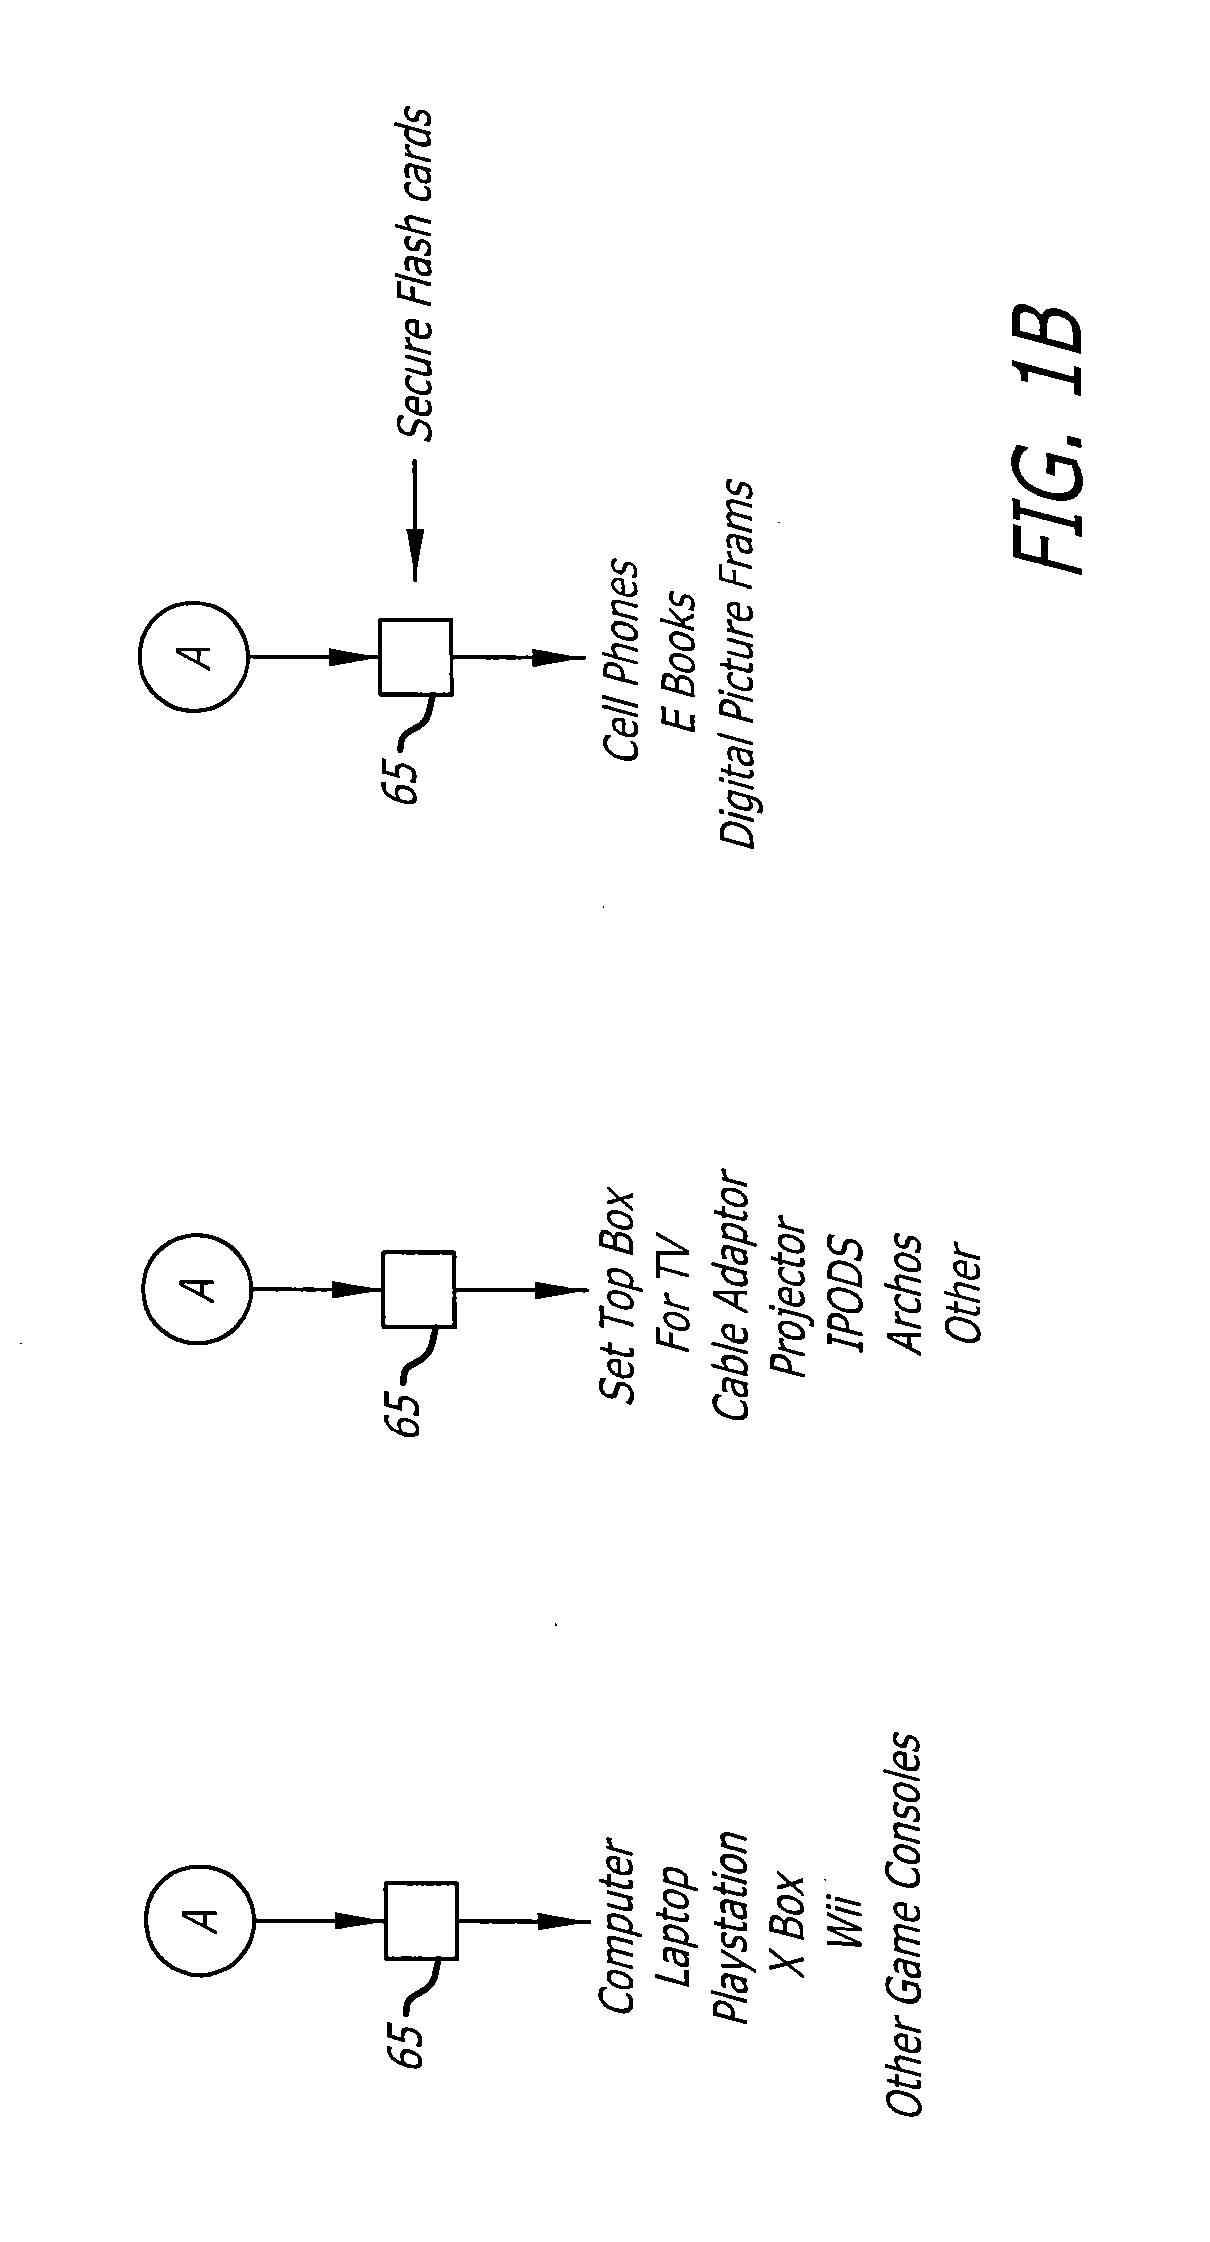 System and method for distributing digital content